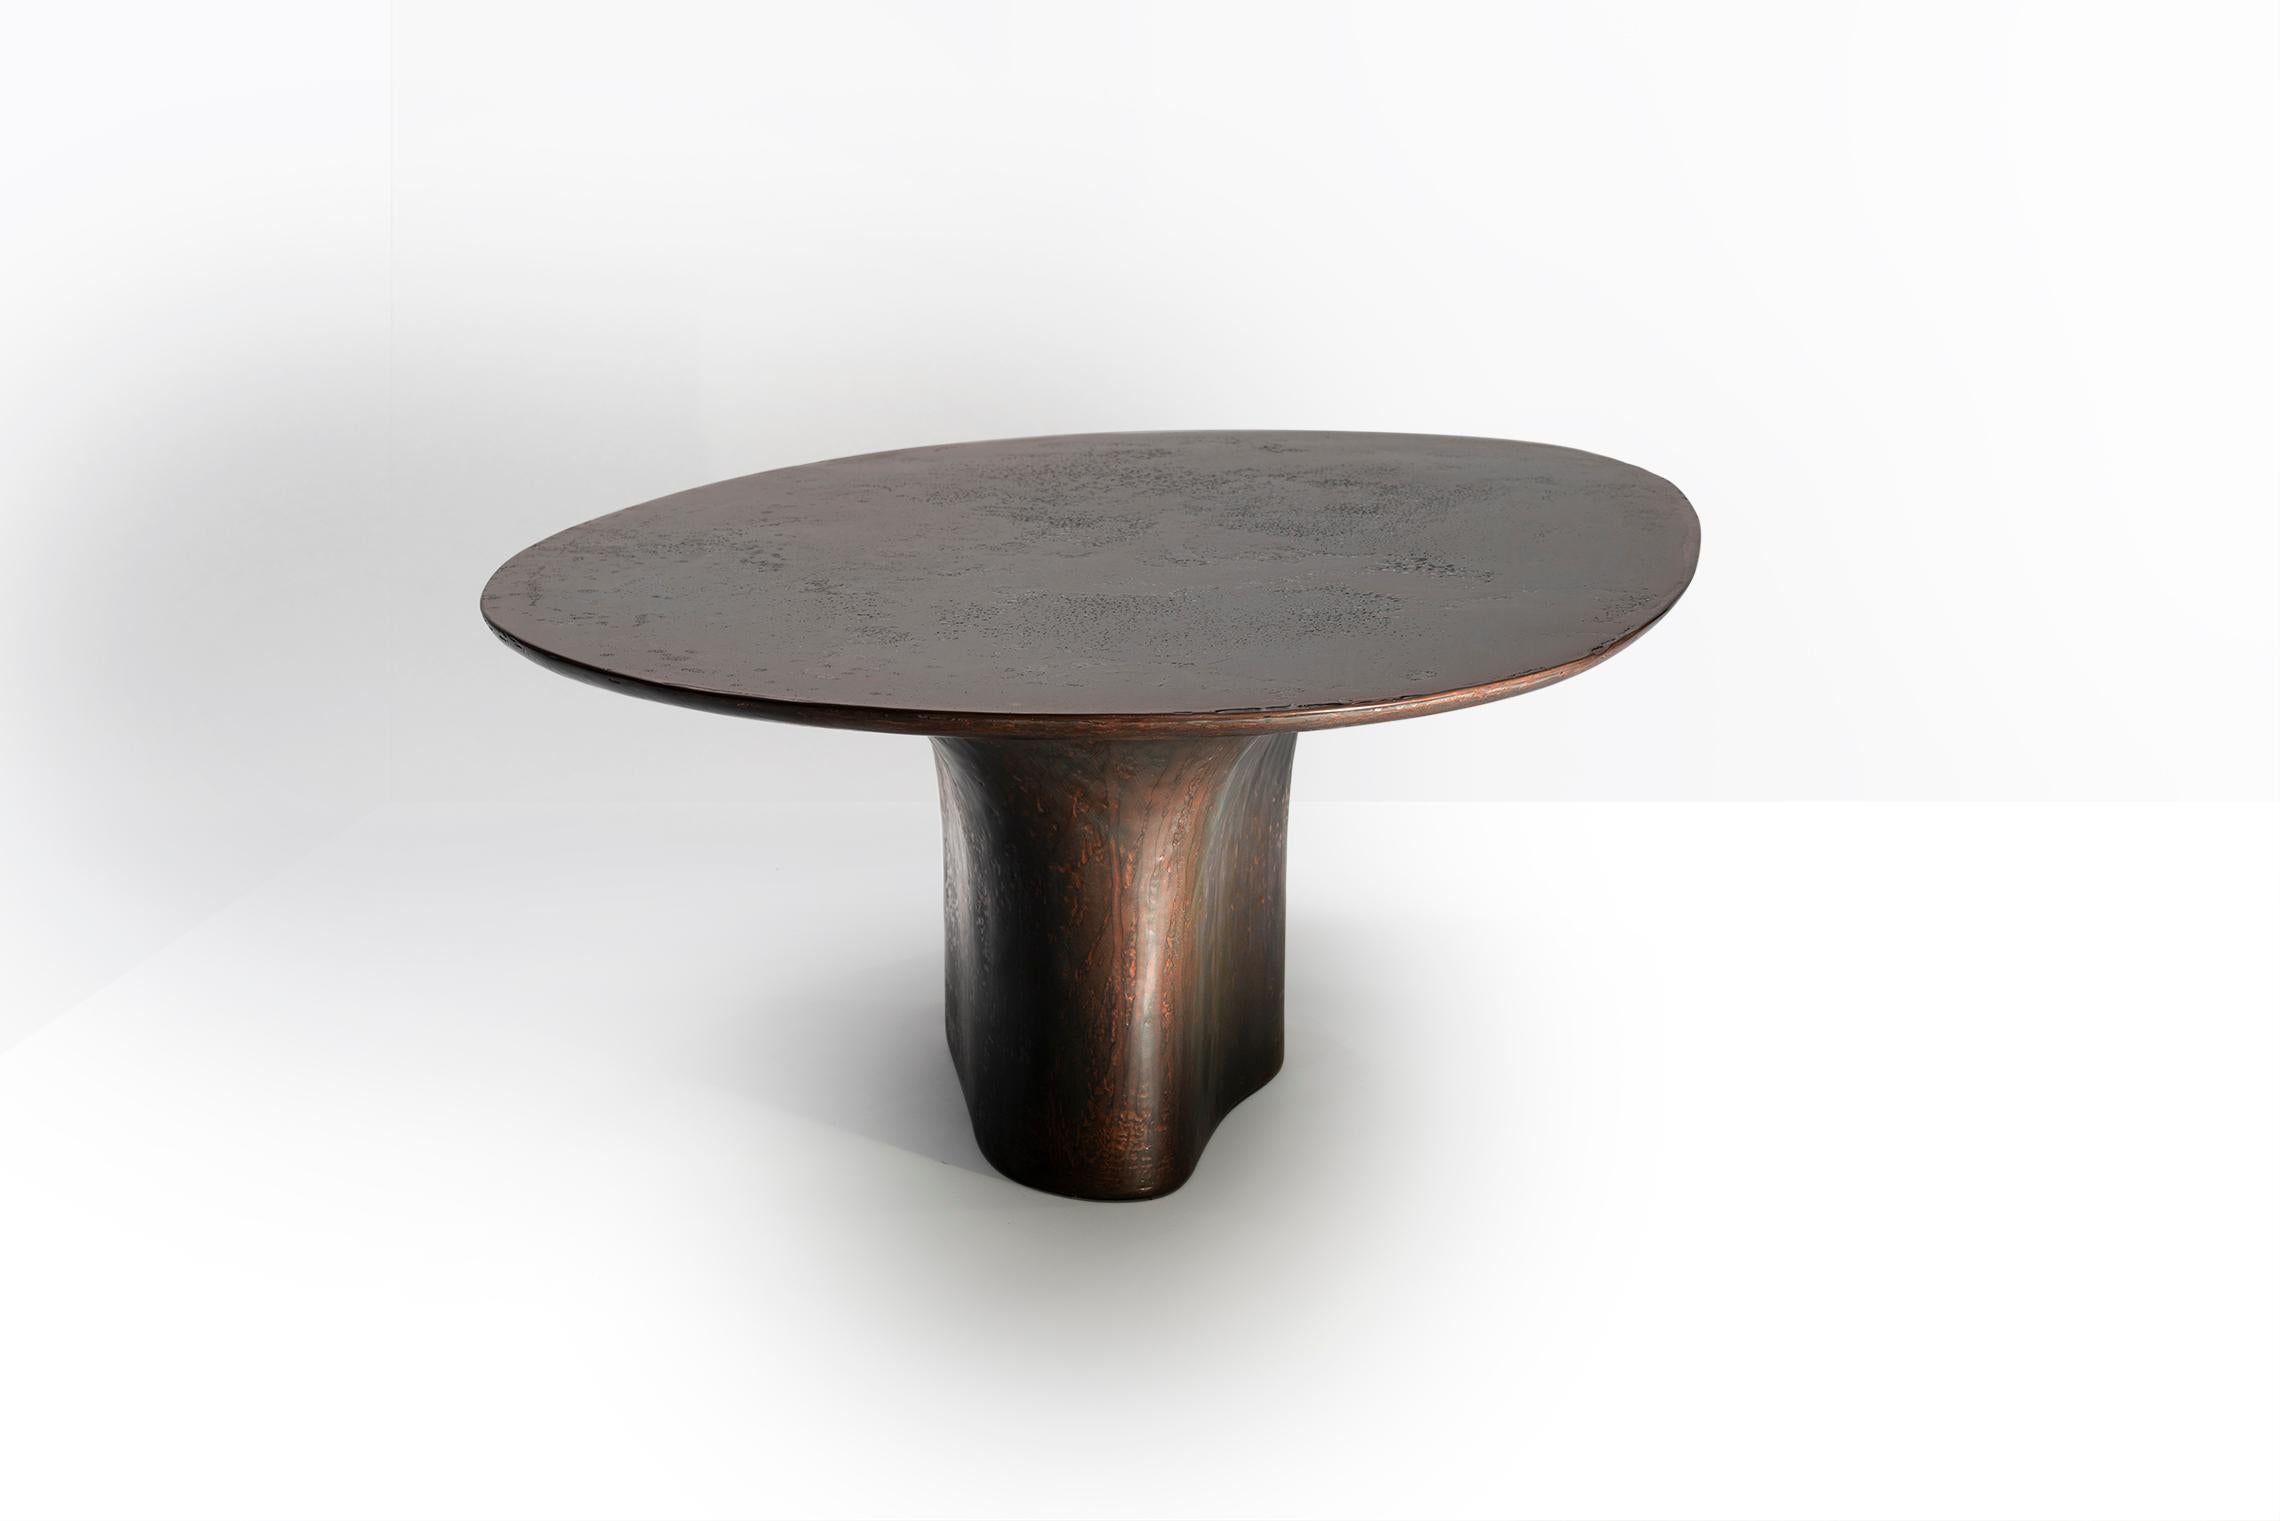 Modern NR Copper V2, 21st Century Sculptured Liquid Oxidized Copper Oval Coffee Table For Sale